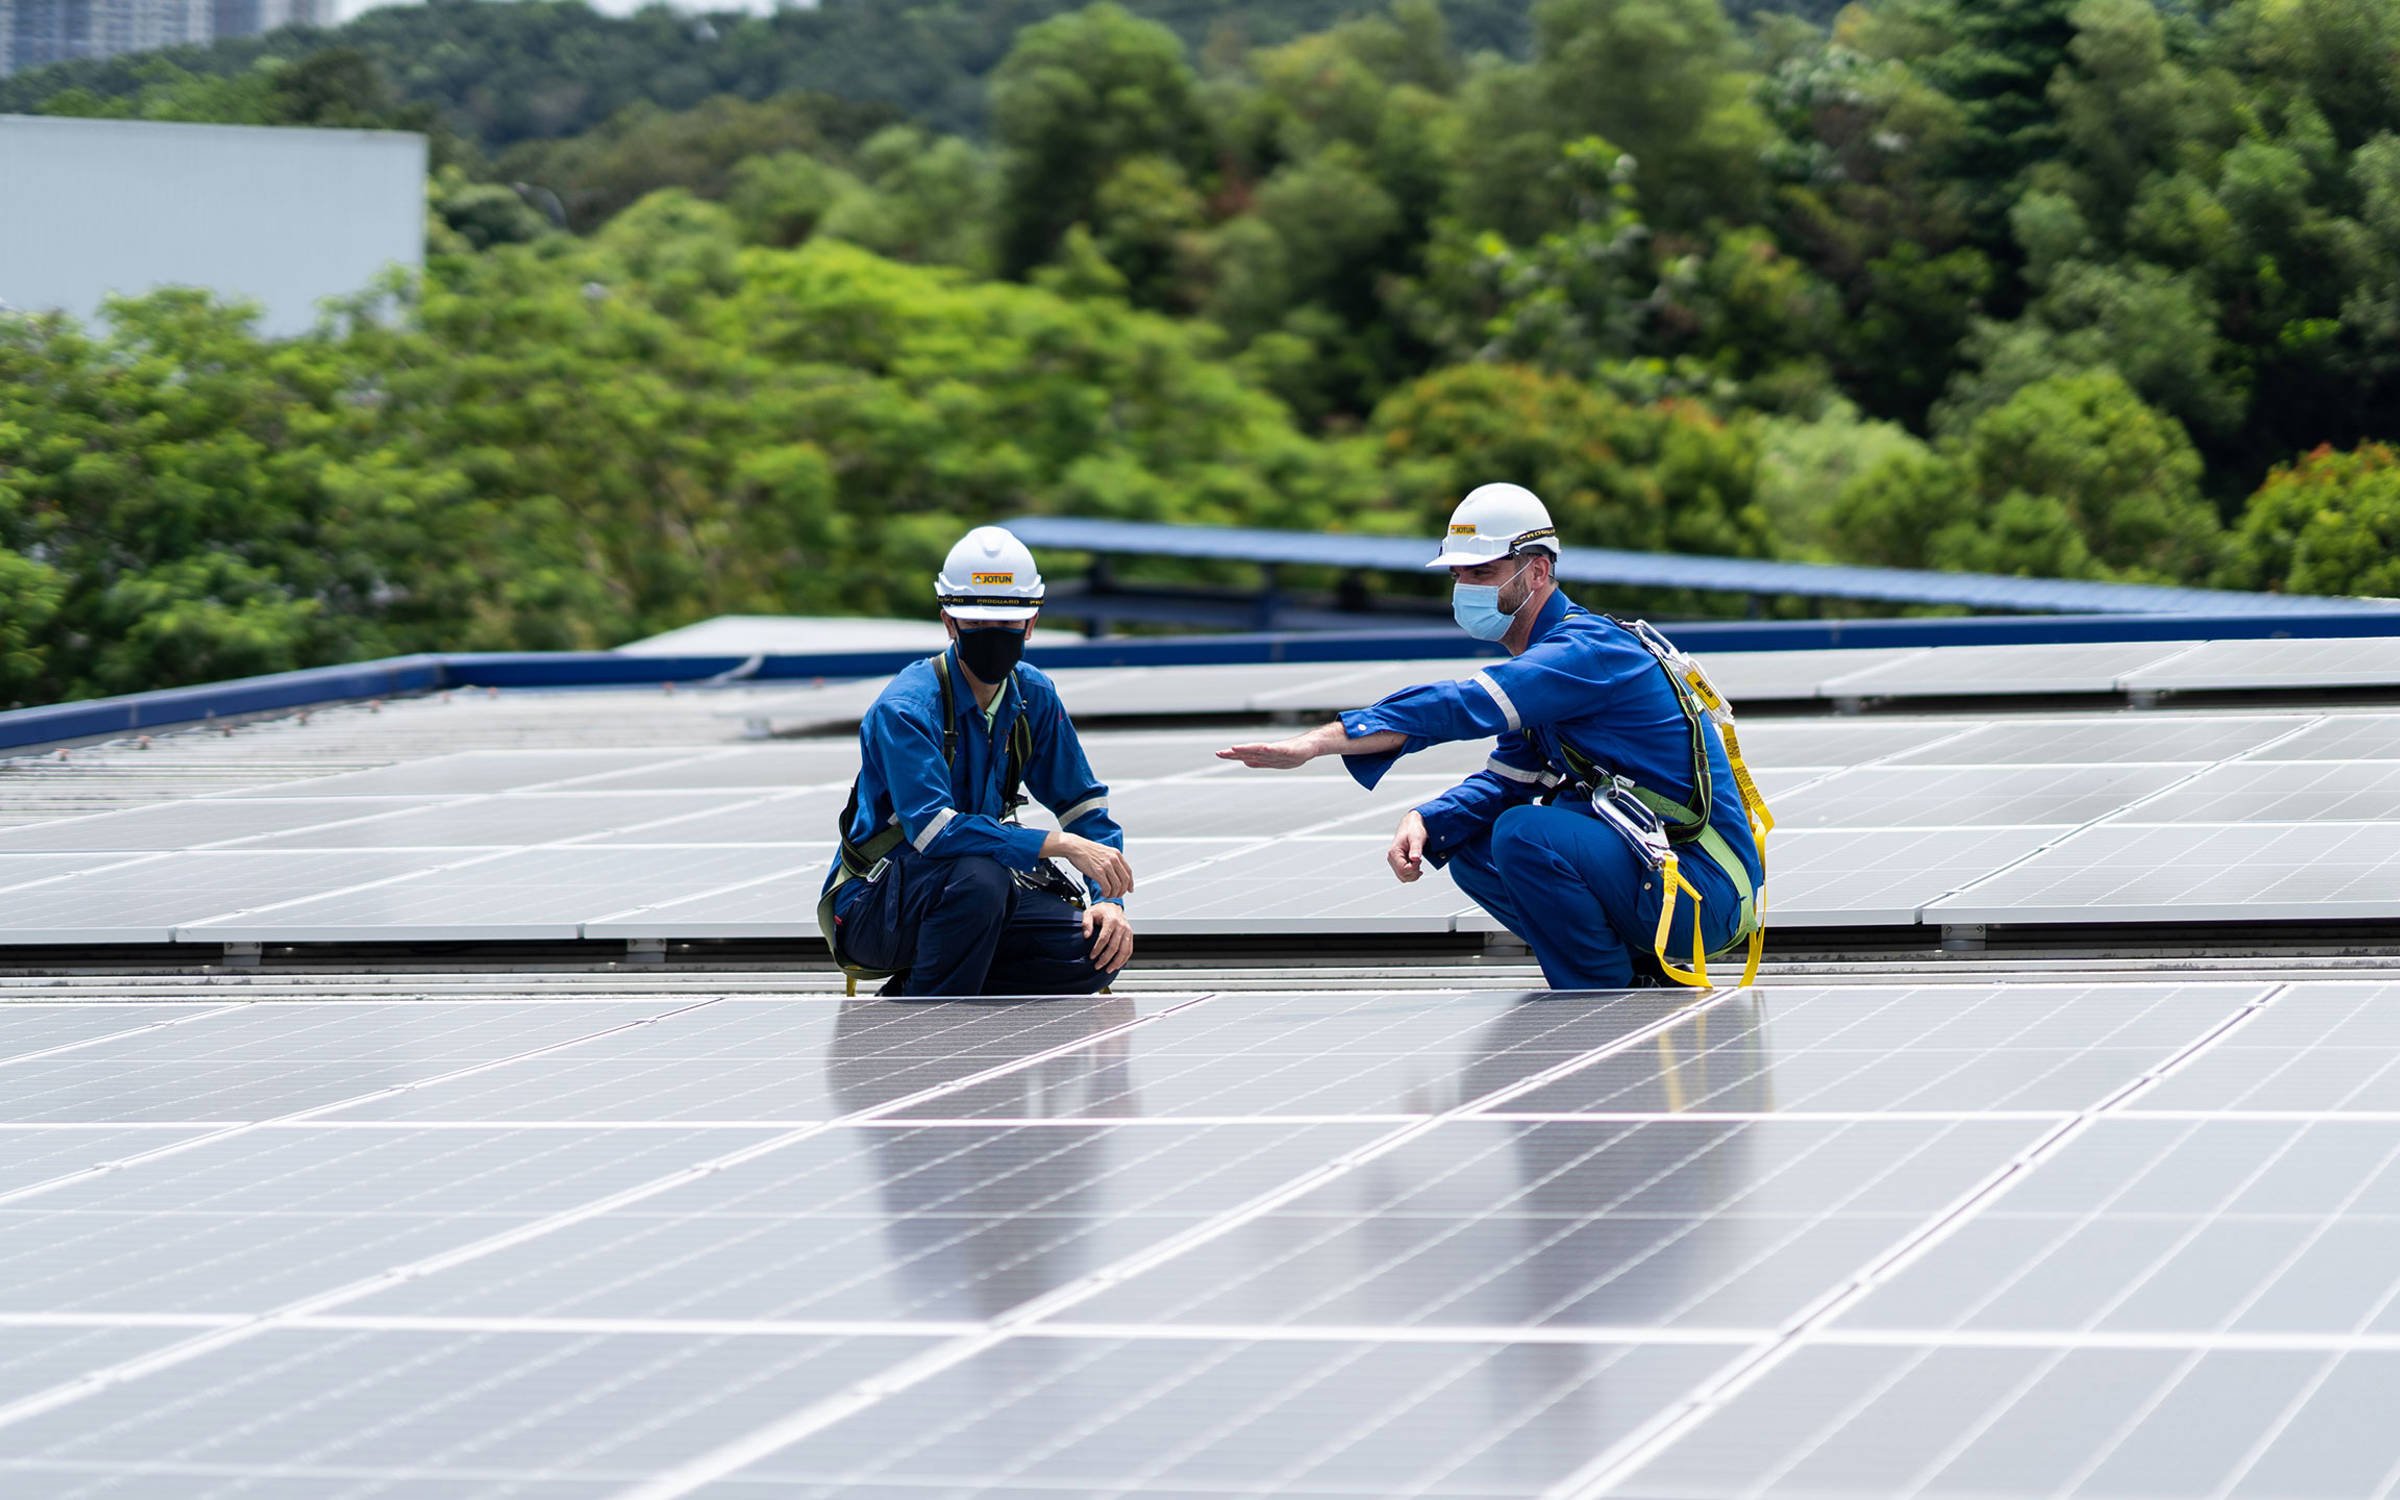 Jotun employees inspecting the solar panels that powers the Nilai factory in Malaysia.